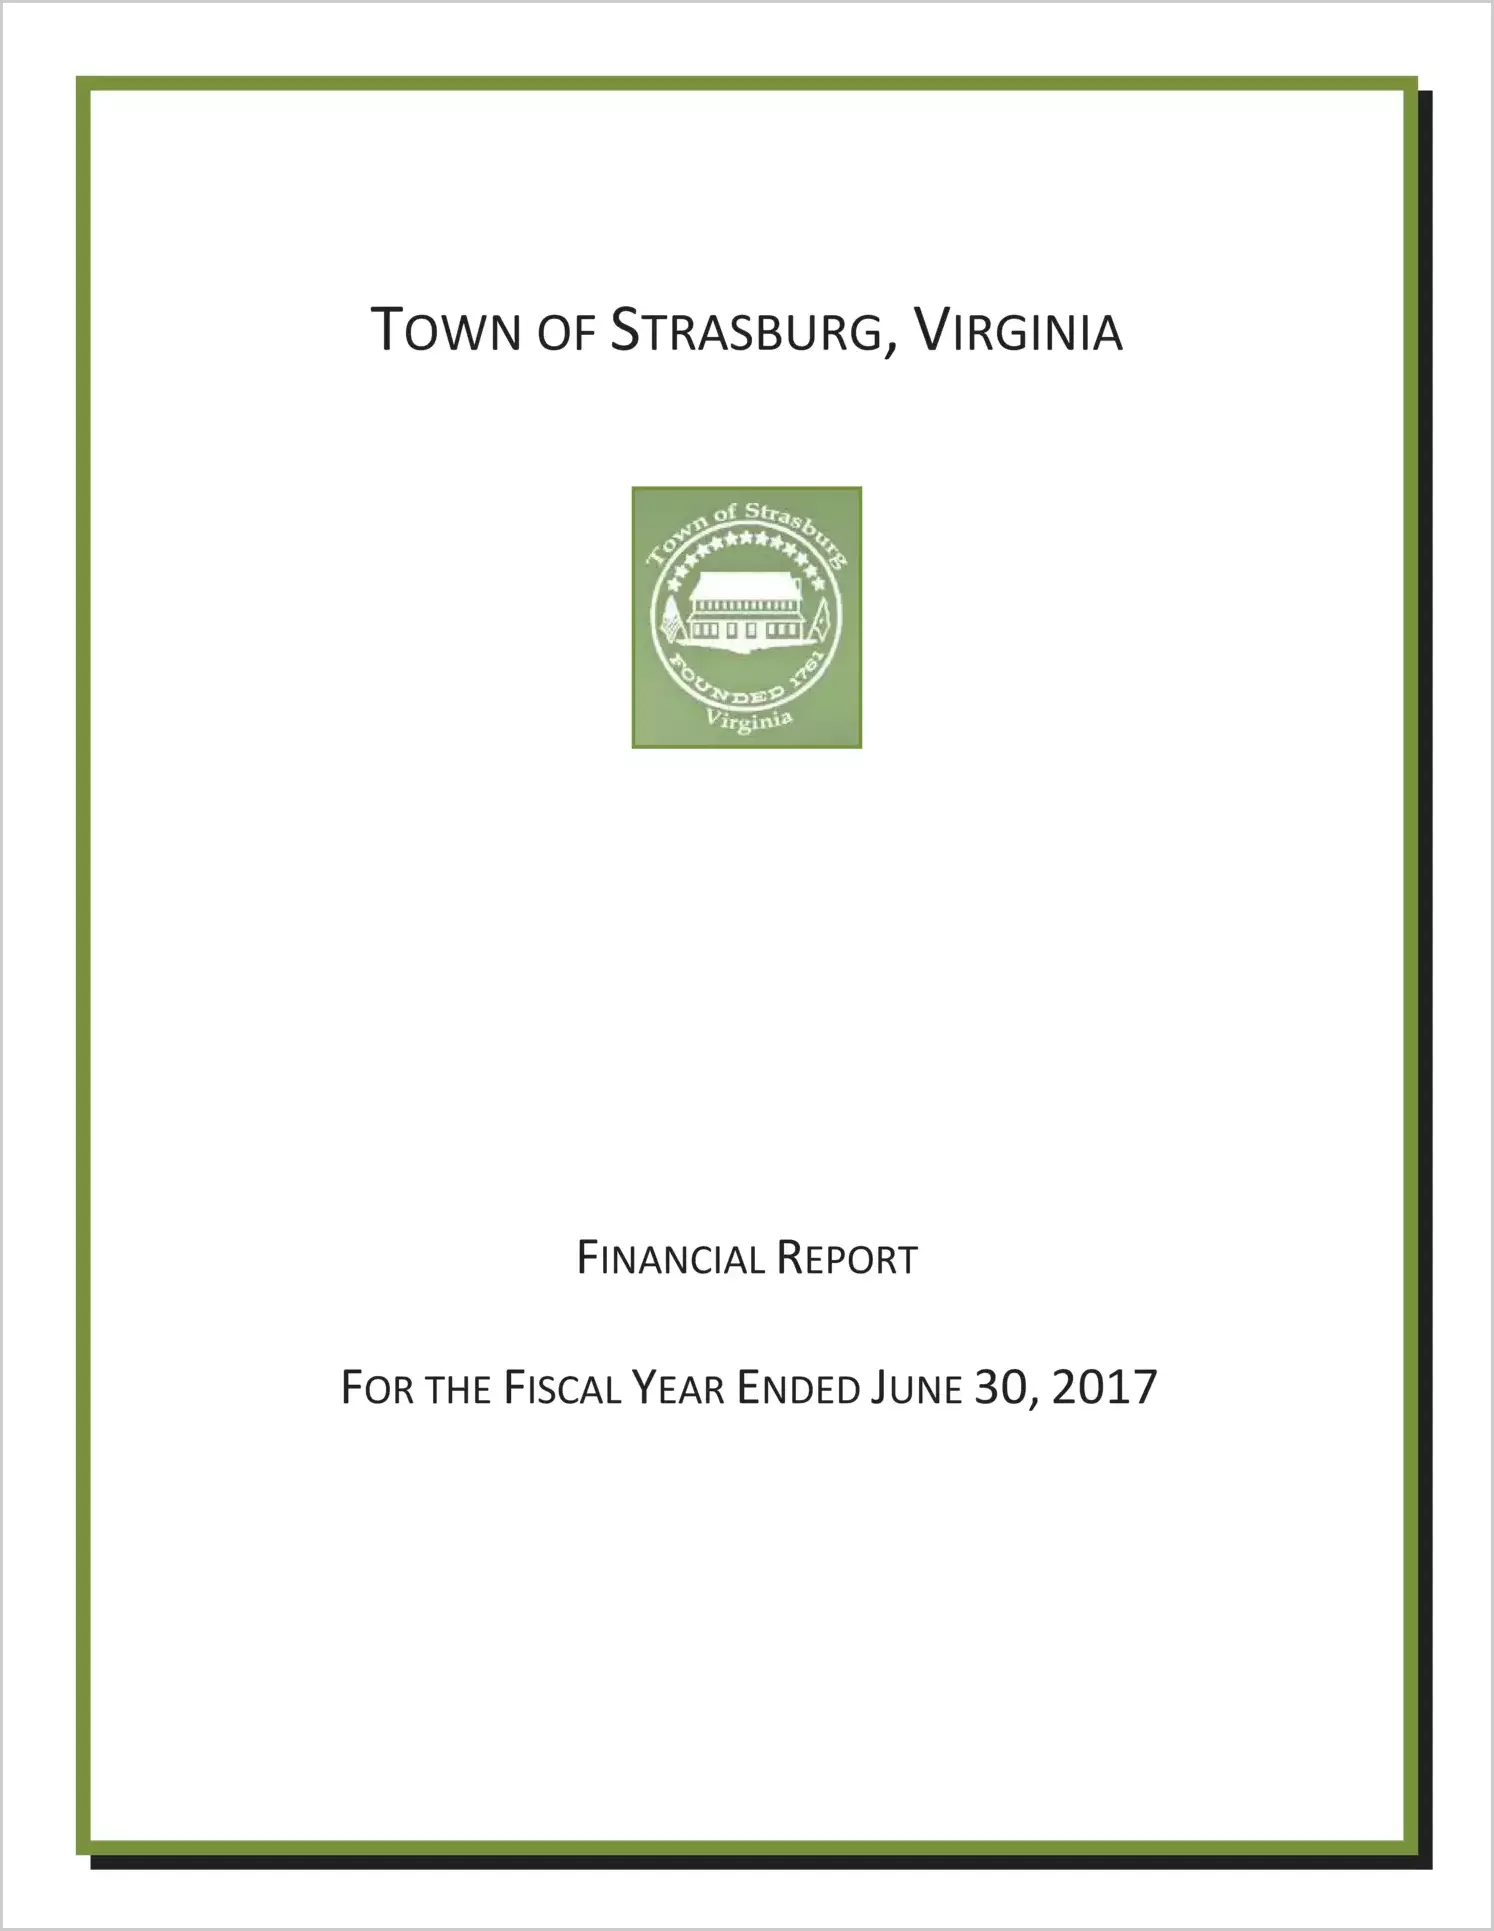 2017 Annual Financial Report for Town of Strasburg